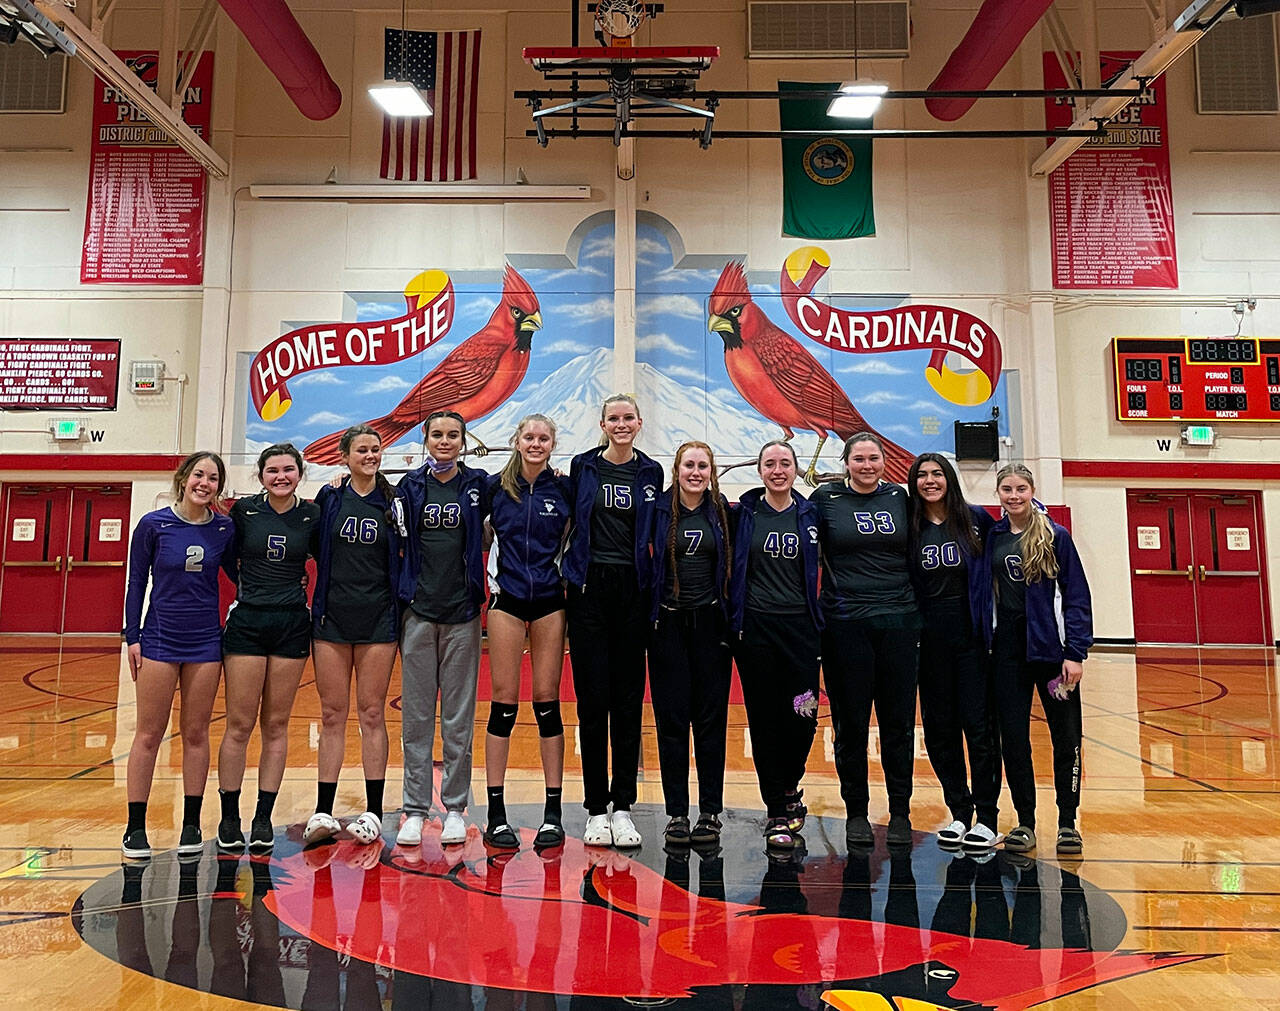 Sequim High School’s volleyball squad celebrates a win over Kingston in the West Central District tourney on Nov. 10 at Franklin Pierce High School in Tacoma. The Wolves went on to beat Olympic to earn a spot at the 2A state tournament in Yakima set for Nov. 19-20. Pictured, from left, are Jordan Hegtvedt, Allie Gale, Angel Wagner, Arianna Stoval, Jolene Vaara, Kendall Hastings, Kelsi Bergeson, Malory Morey, Sammie Bacon, Kaila Spaulding and Mia Coudriet. Photo by Wendy Morey